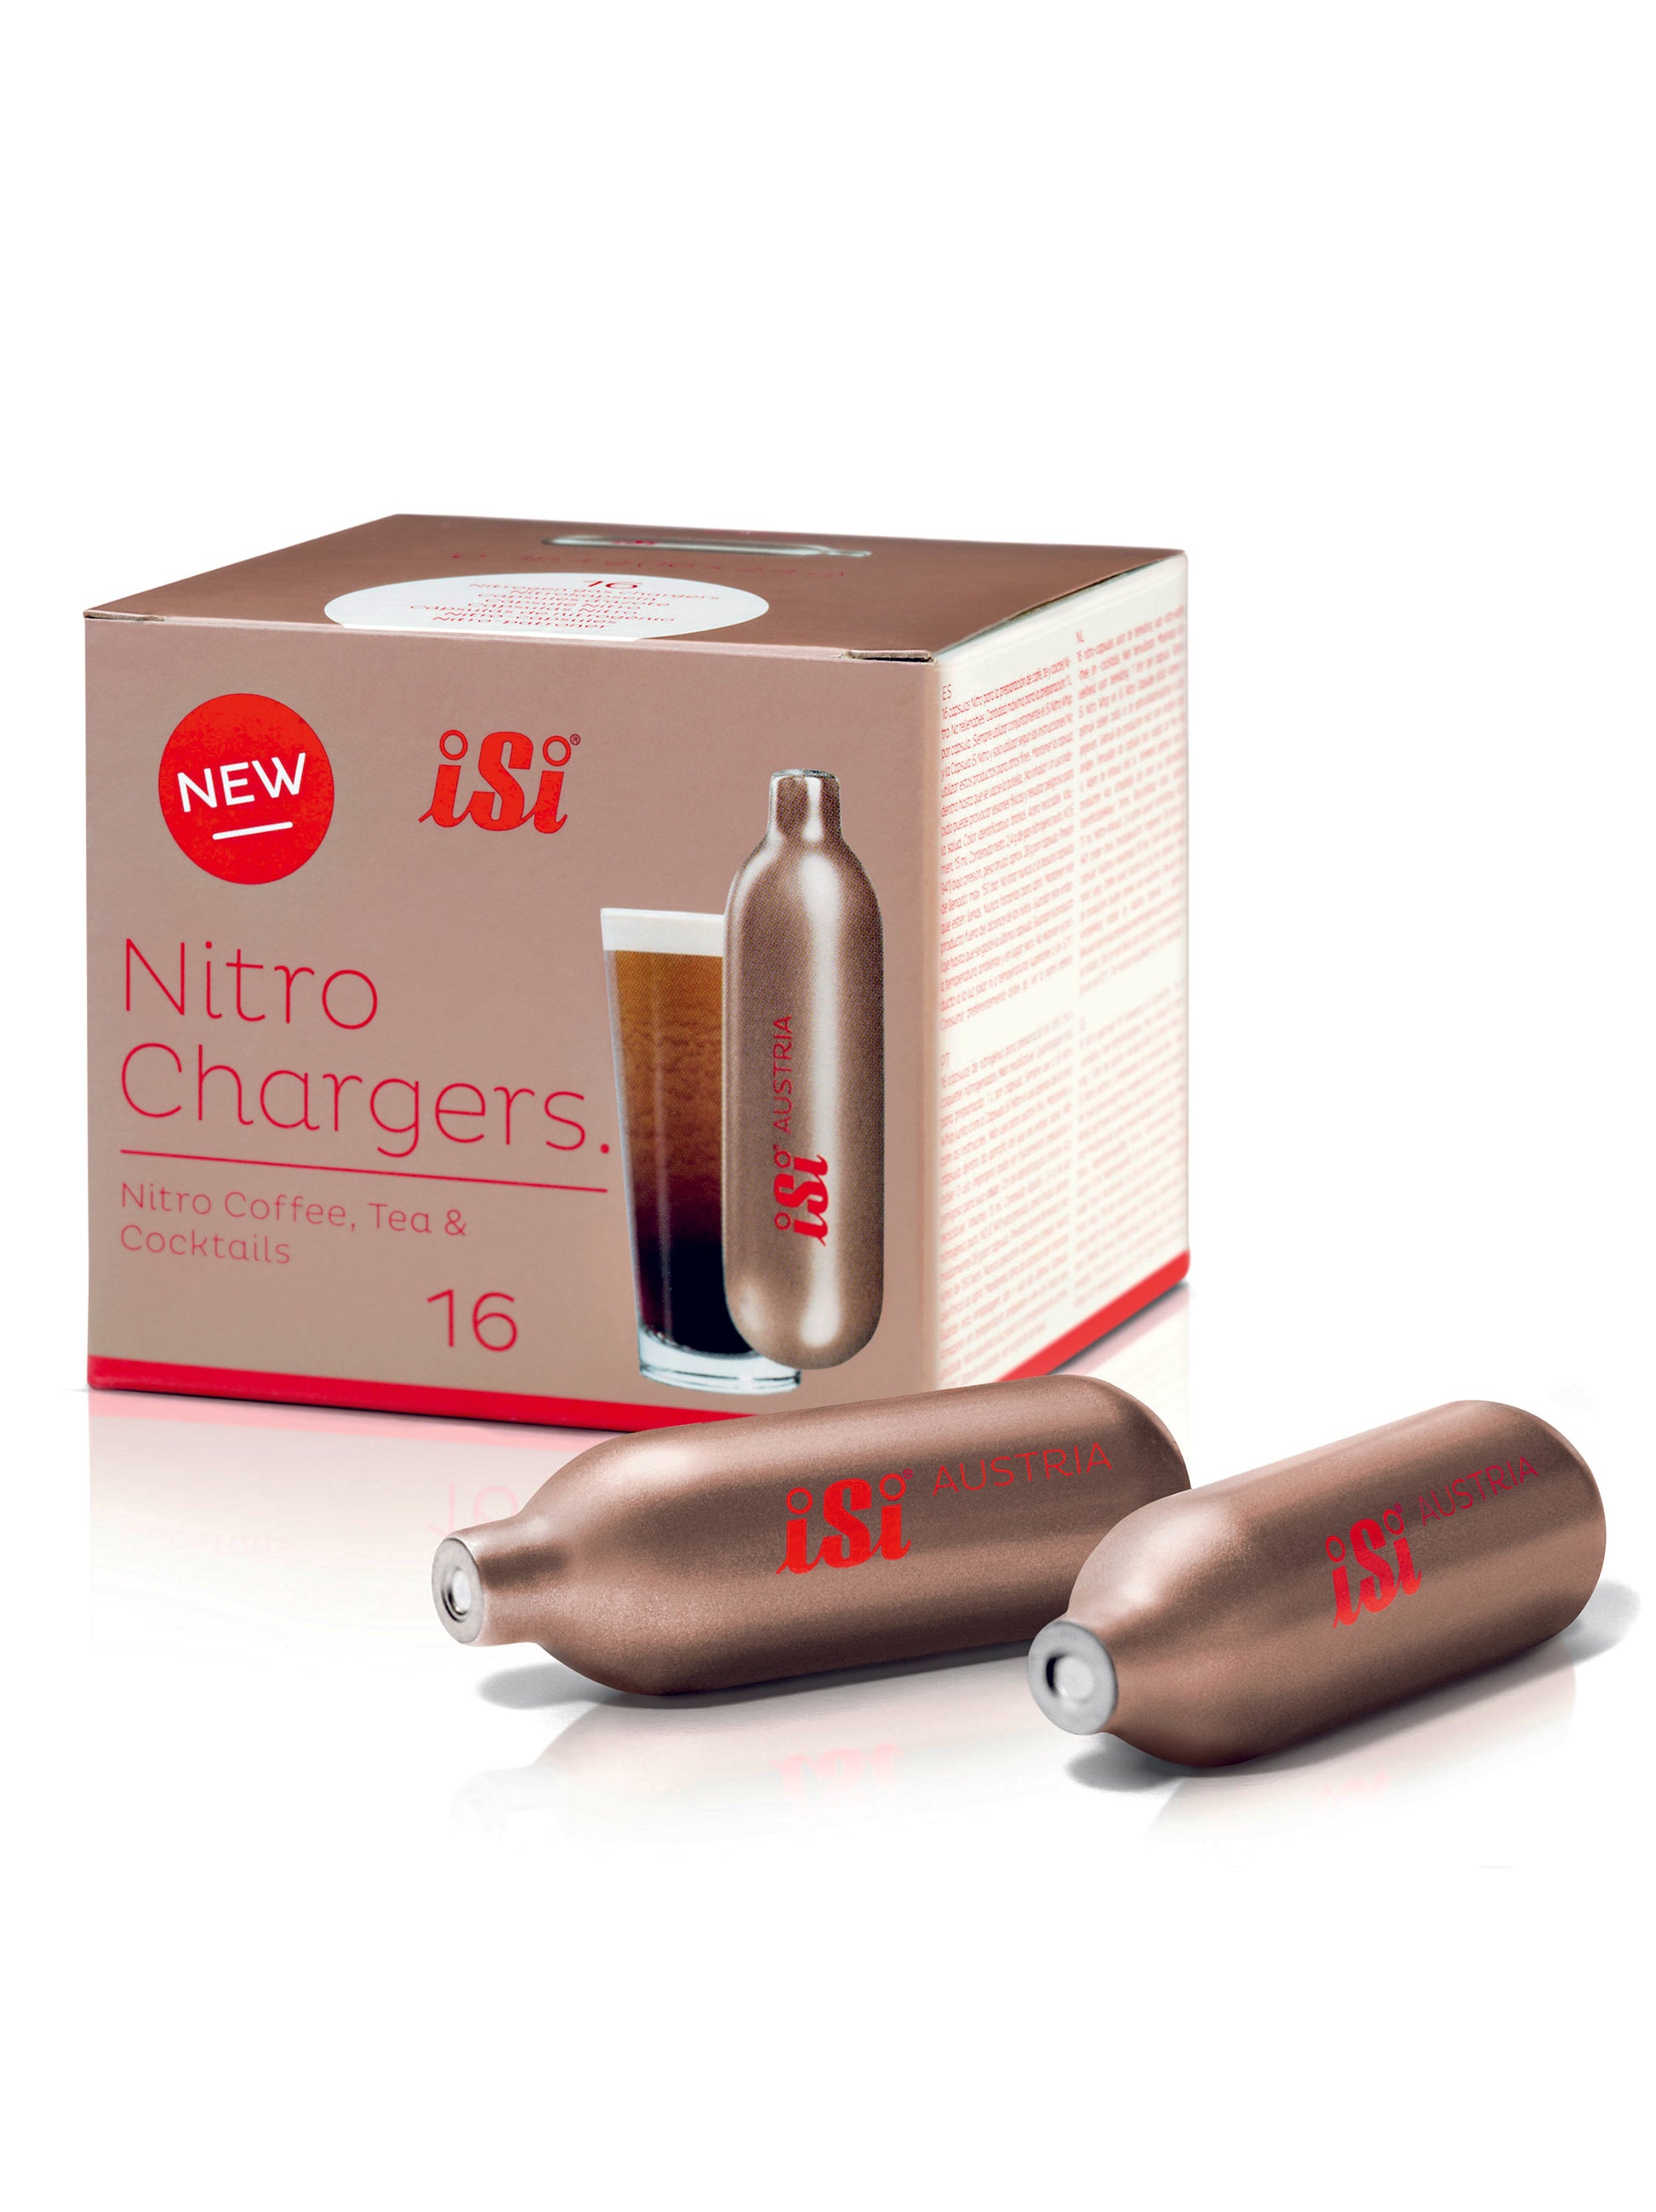 ISI Nitro Chargers- 192 pack